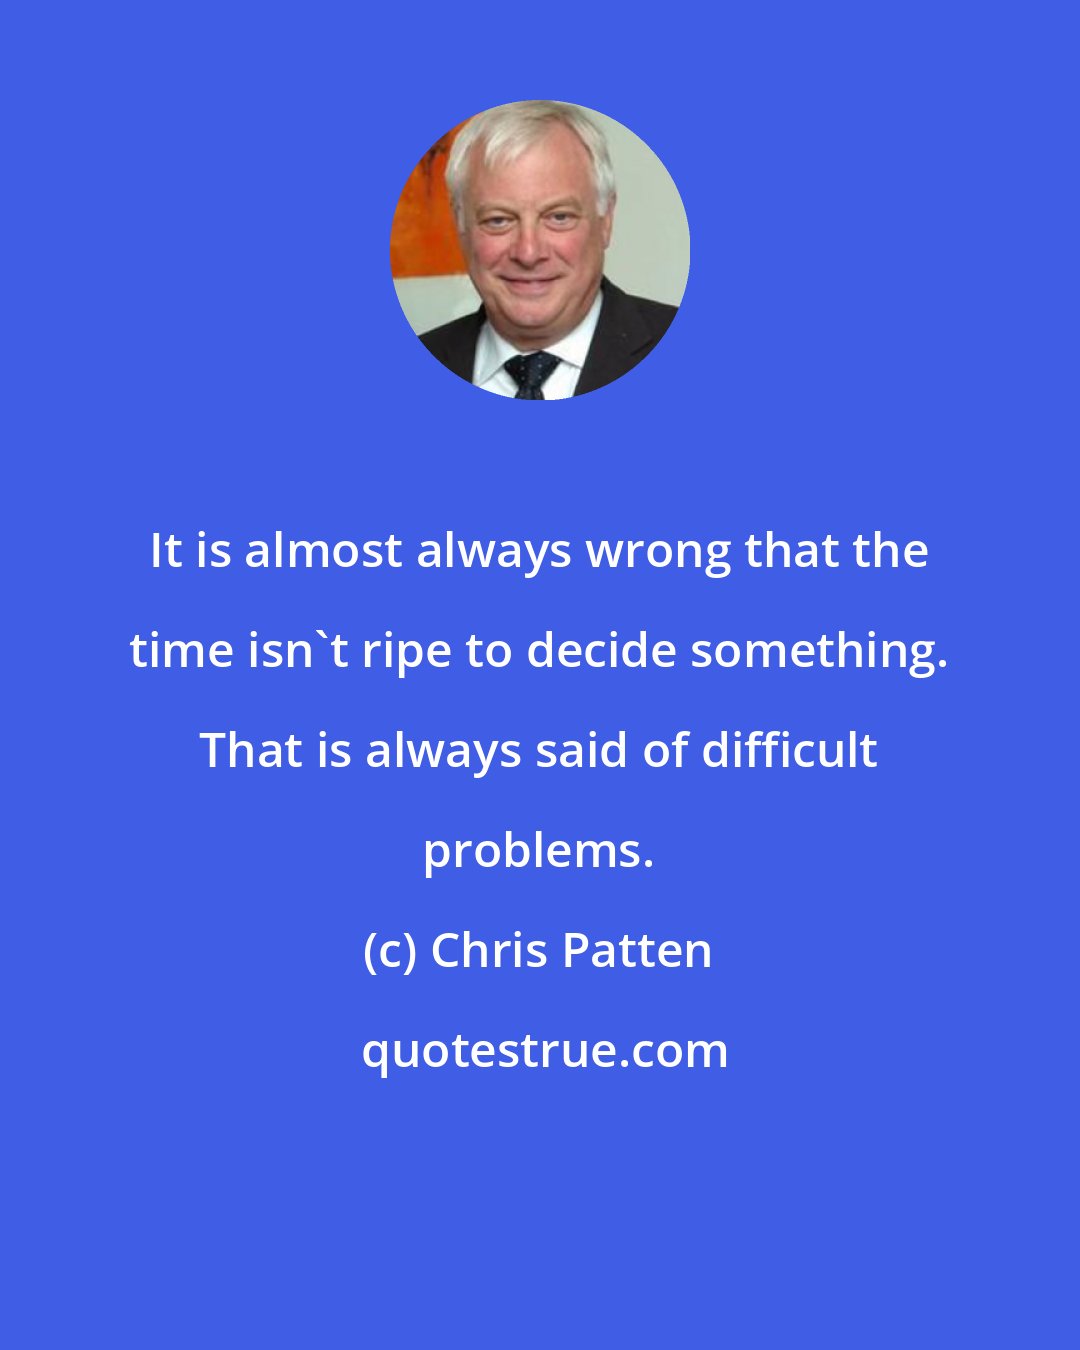 Chris Patten: It is almost always wrong that the time isn't ripe to decide something. That is always said of difficult problems.